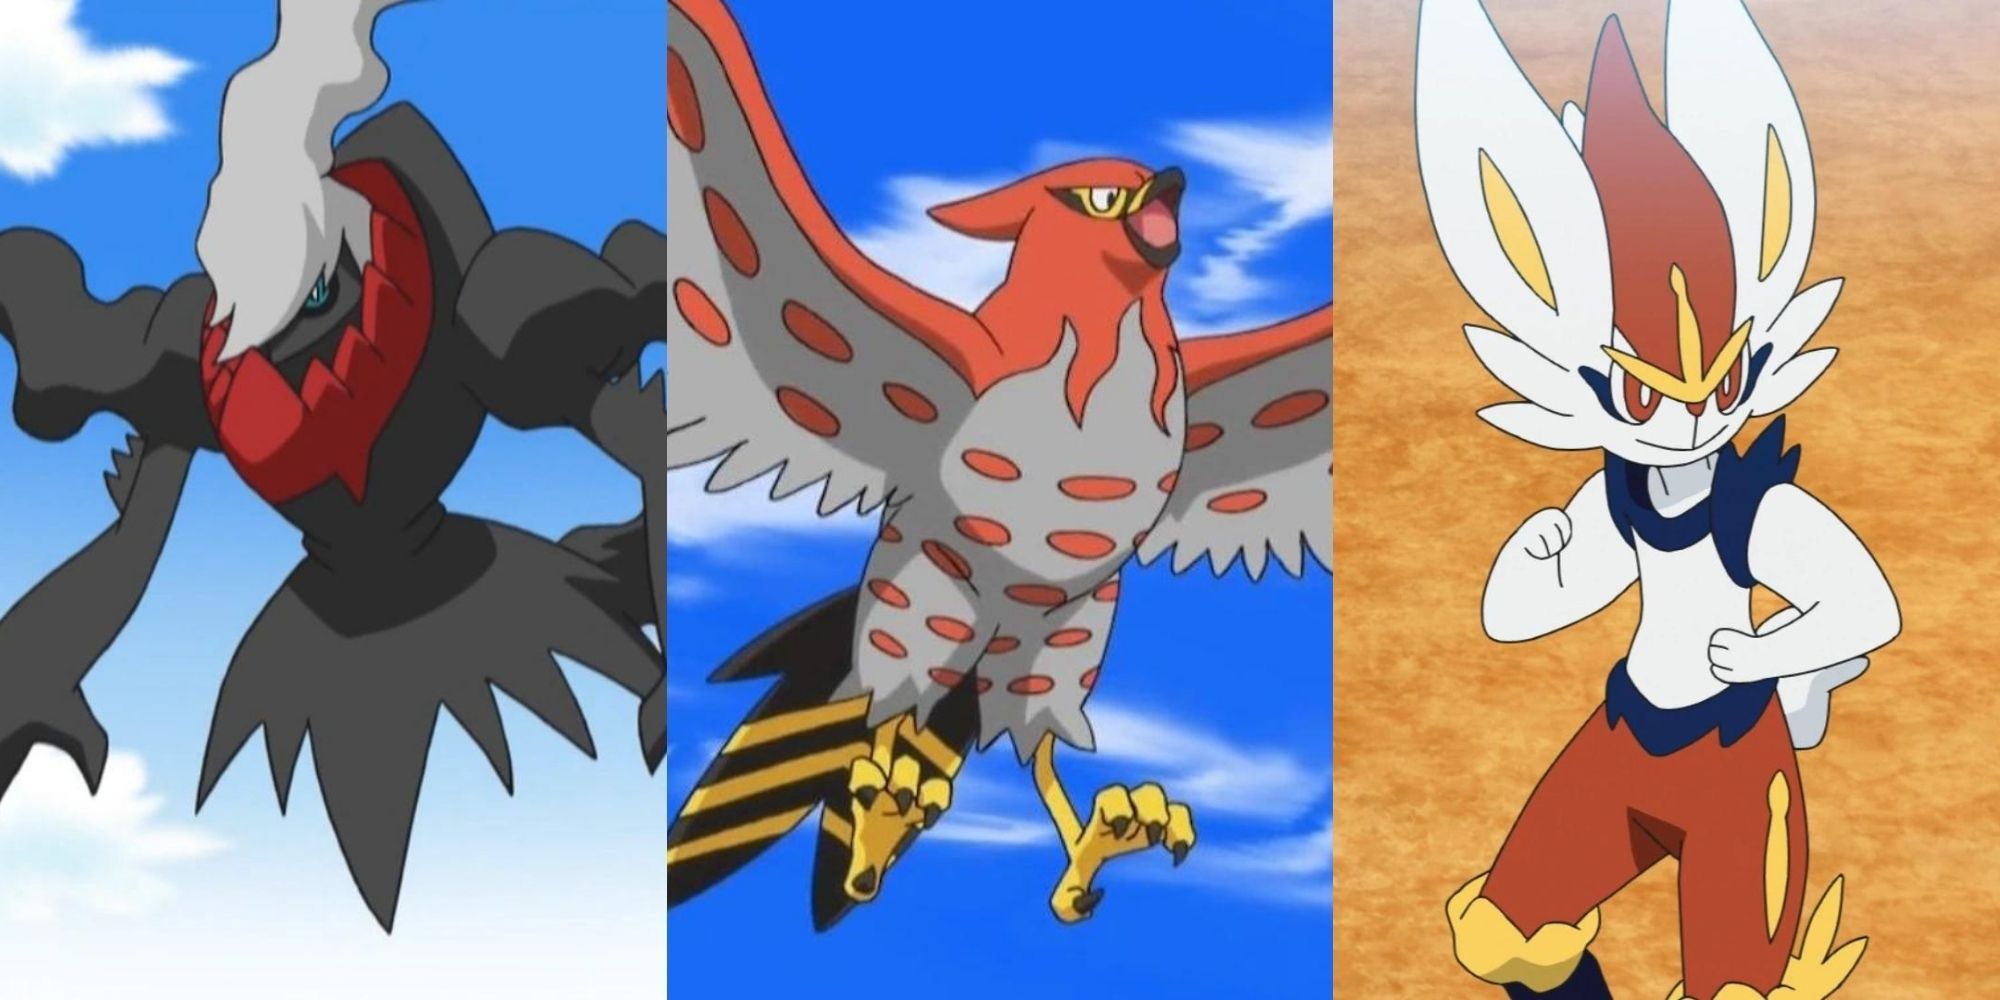 A collage of 3 Pokemon that were nerfed over the years: Darkrai, Talonflame and Cinderace.